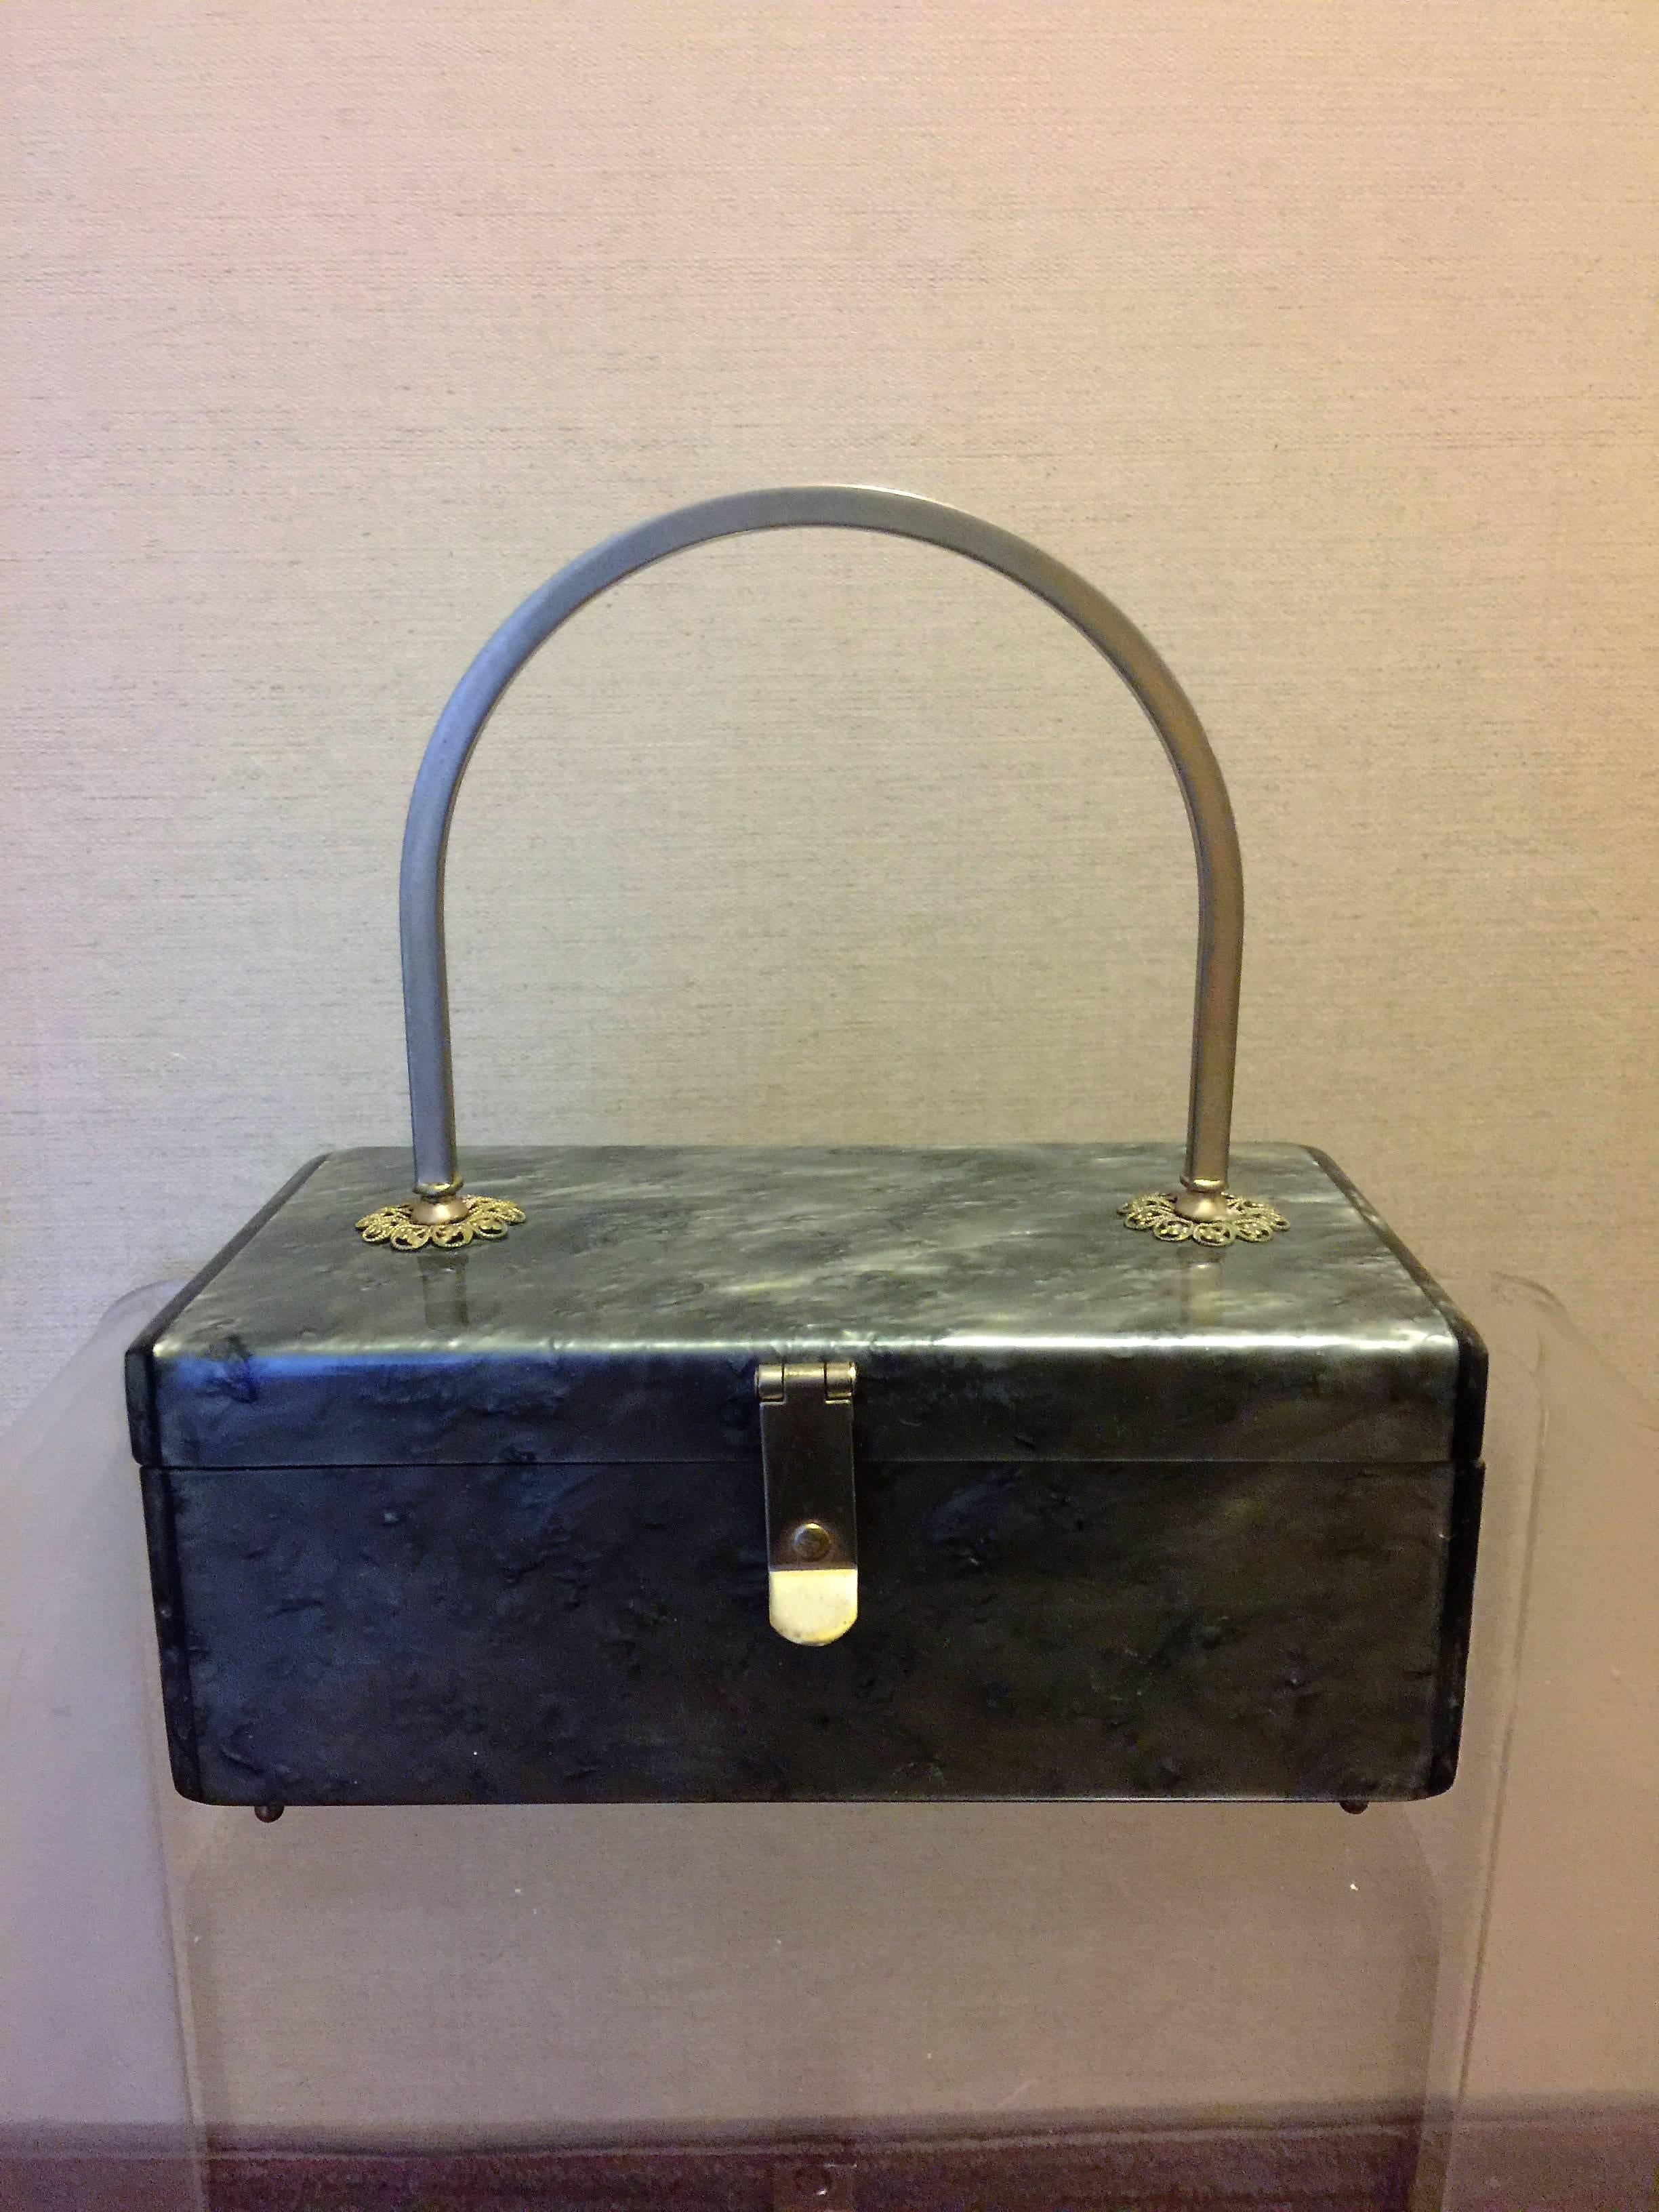 Modern Rectangular 1950's Lucite Handbag with Brass Filagree Accents and Handle.Original Mirror inside with Brass Snap Closure.Designed by Toro.The Measurements of the Handbag is 3 1/4